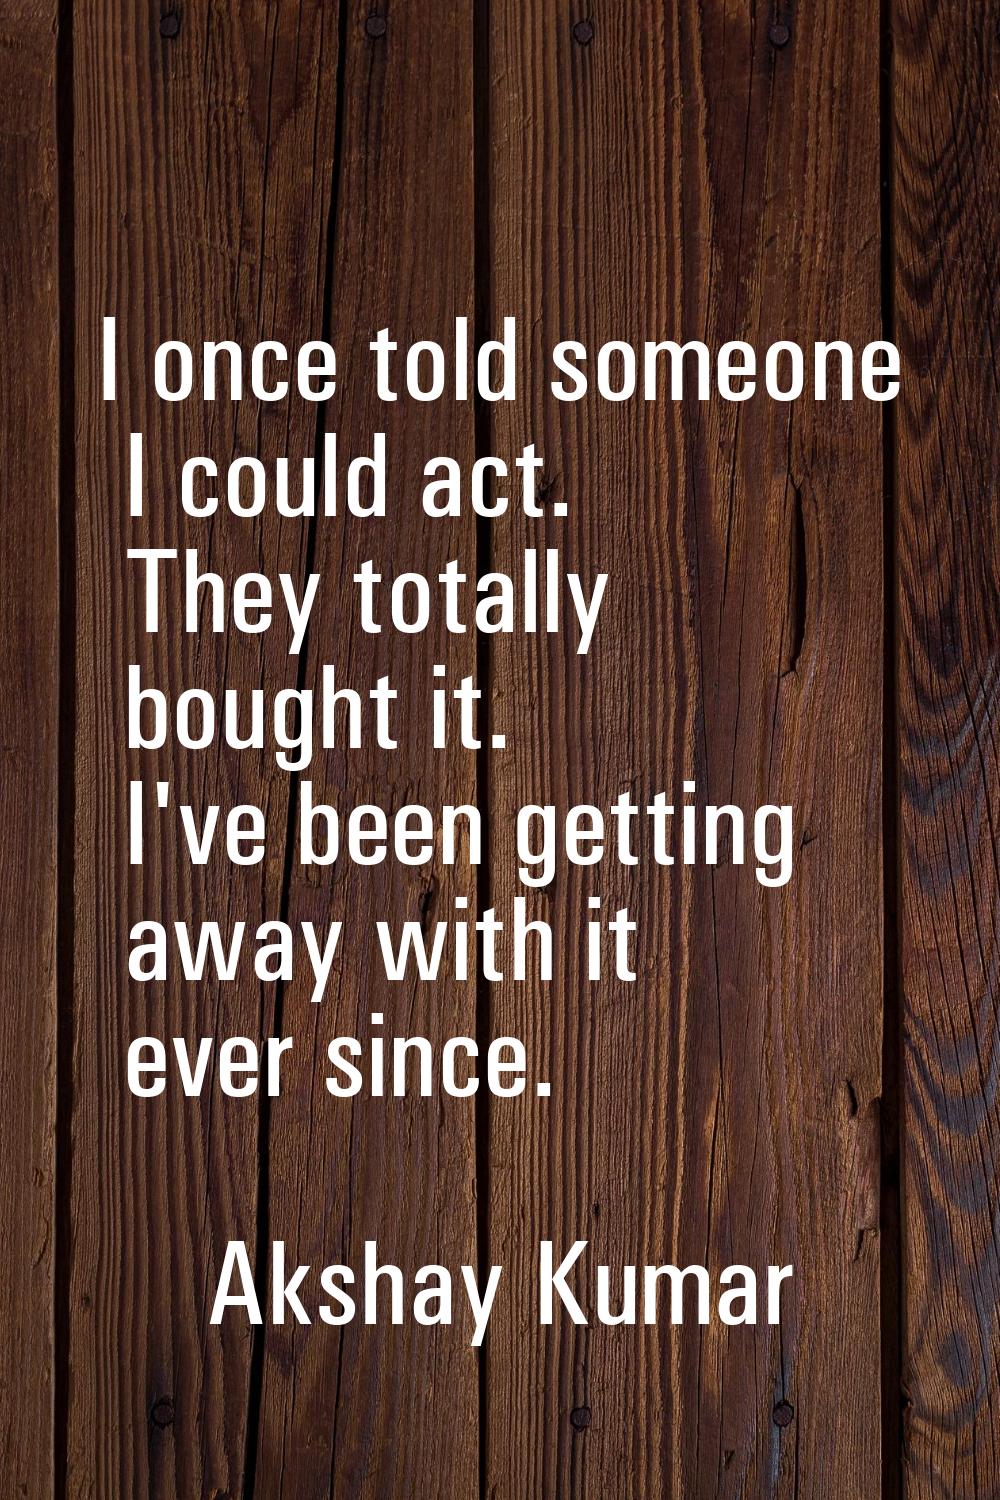 I once told someone I could act. They totally bought it. I've been getting away with it ever since.